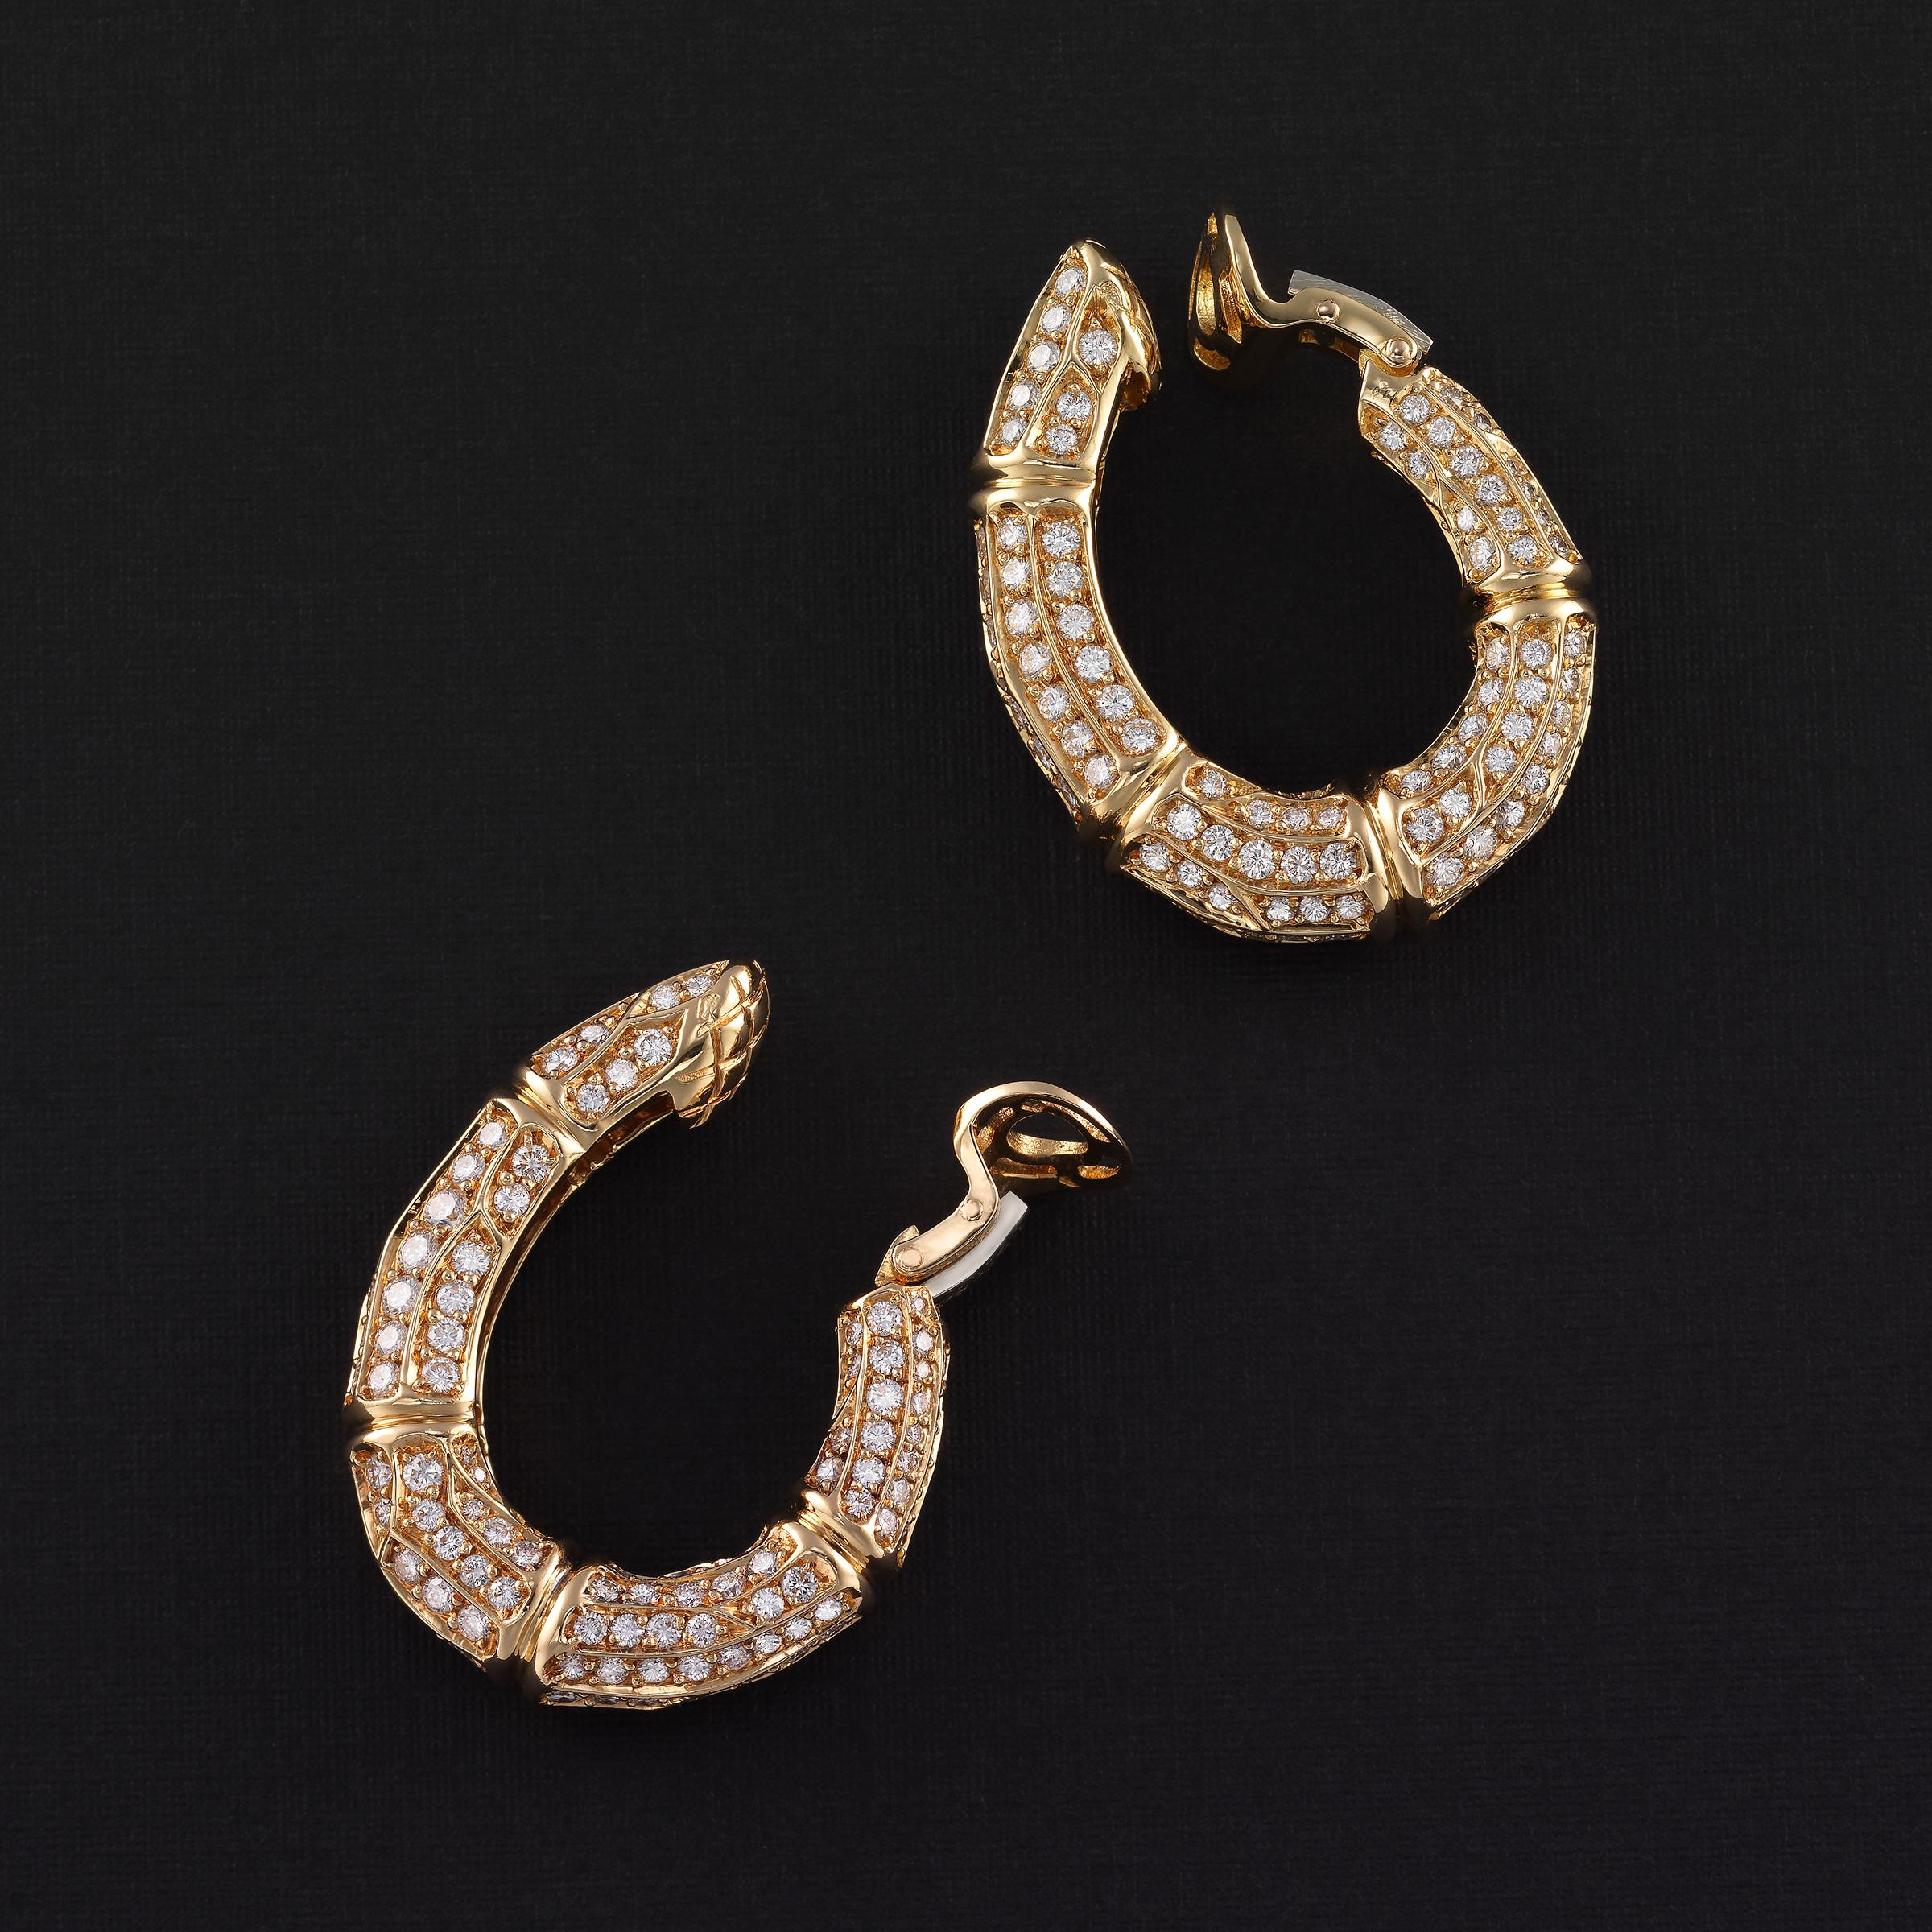 Cartier Bamboo Diamond 18k Gold Vintage Hoop Earrings In Excellent Condition For Sale In Dallas, TX